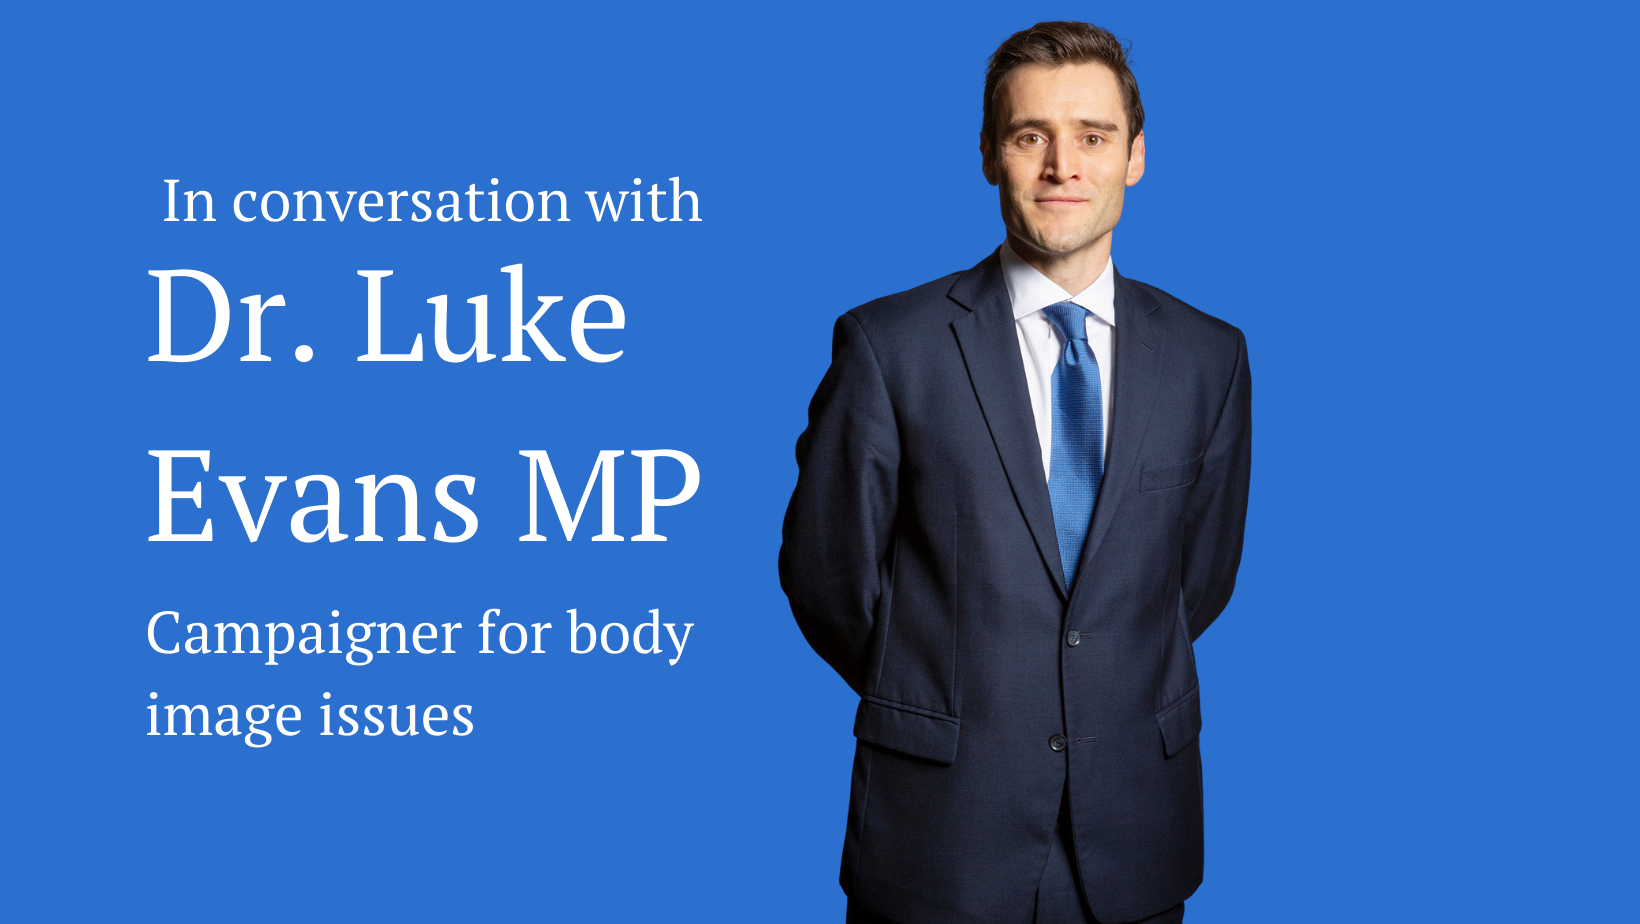 Profiles header showing Dr Luke Evans MP and the text: 